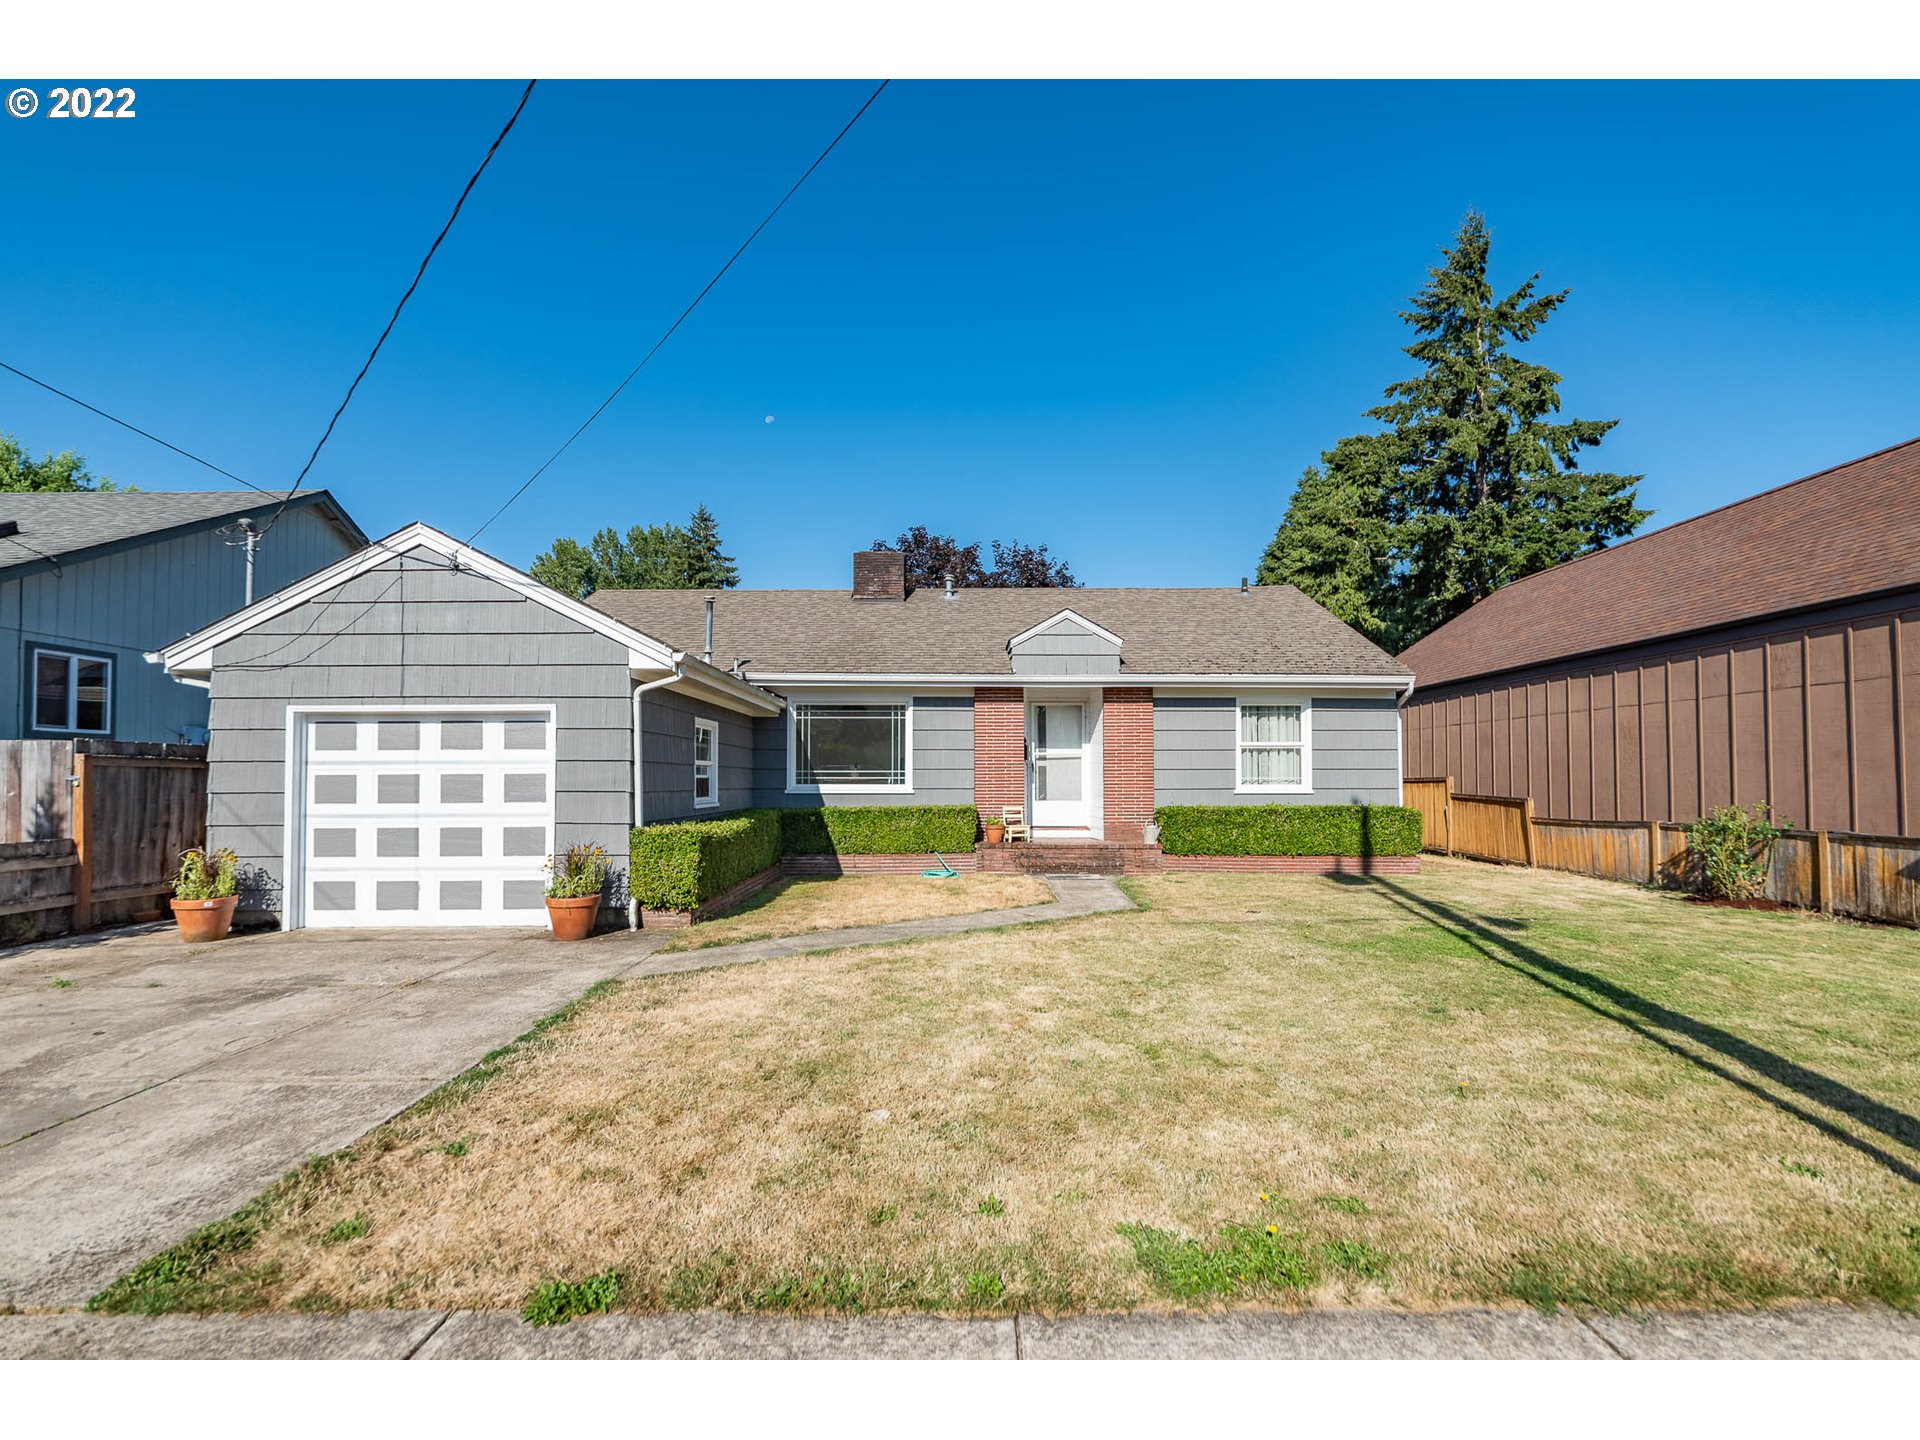 719 S 7TH ST, Cottage Grove, OR 